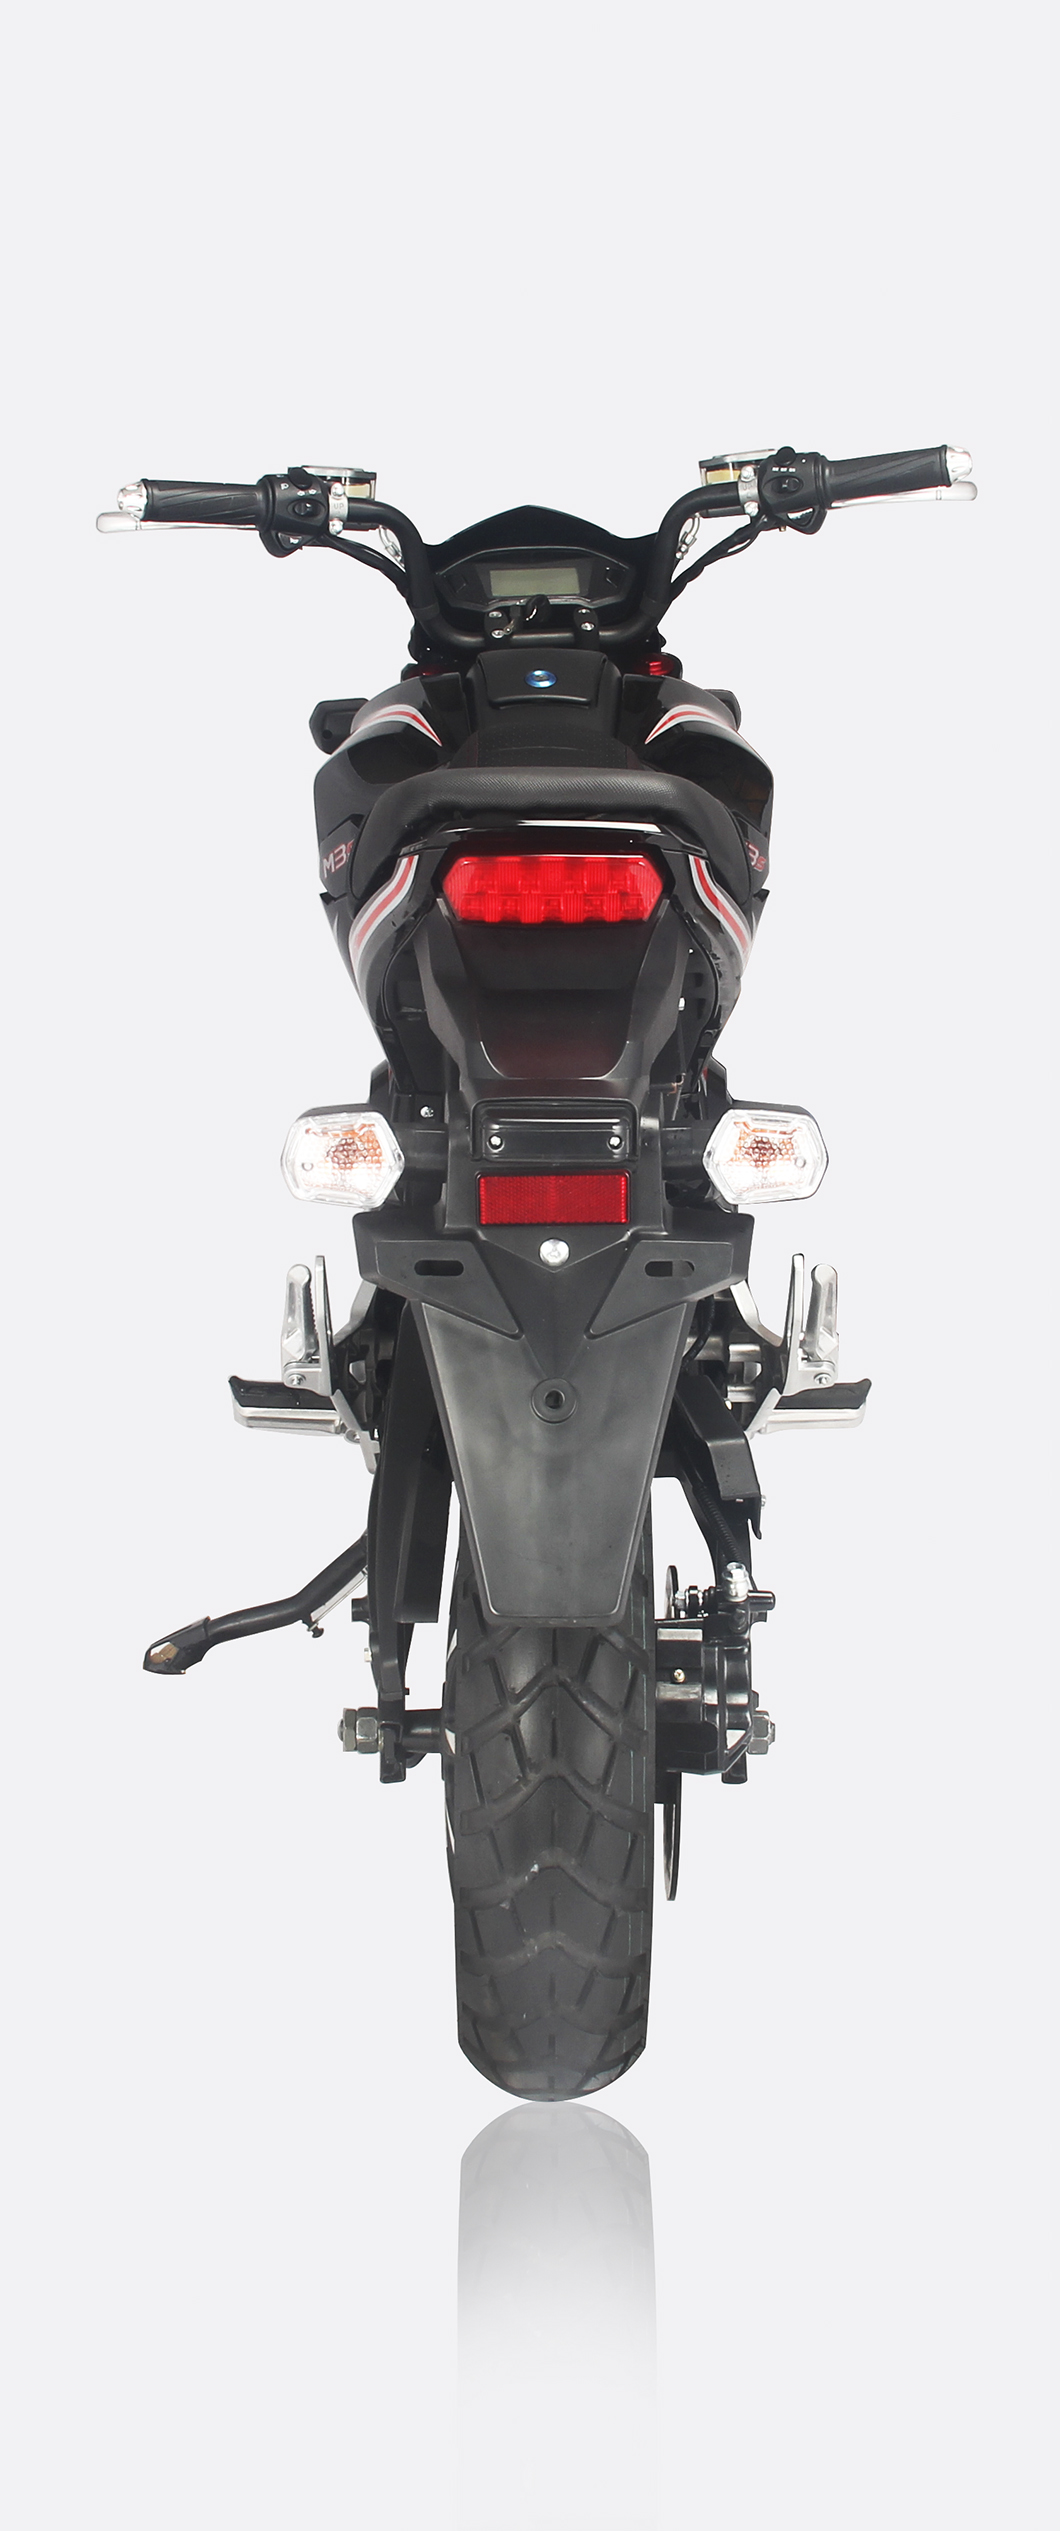 HIGH POWERFUL 2000W SPORT RACING TYPE ELECTRIC MOTORCYCLE SCOOTER (M5)